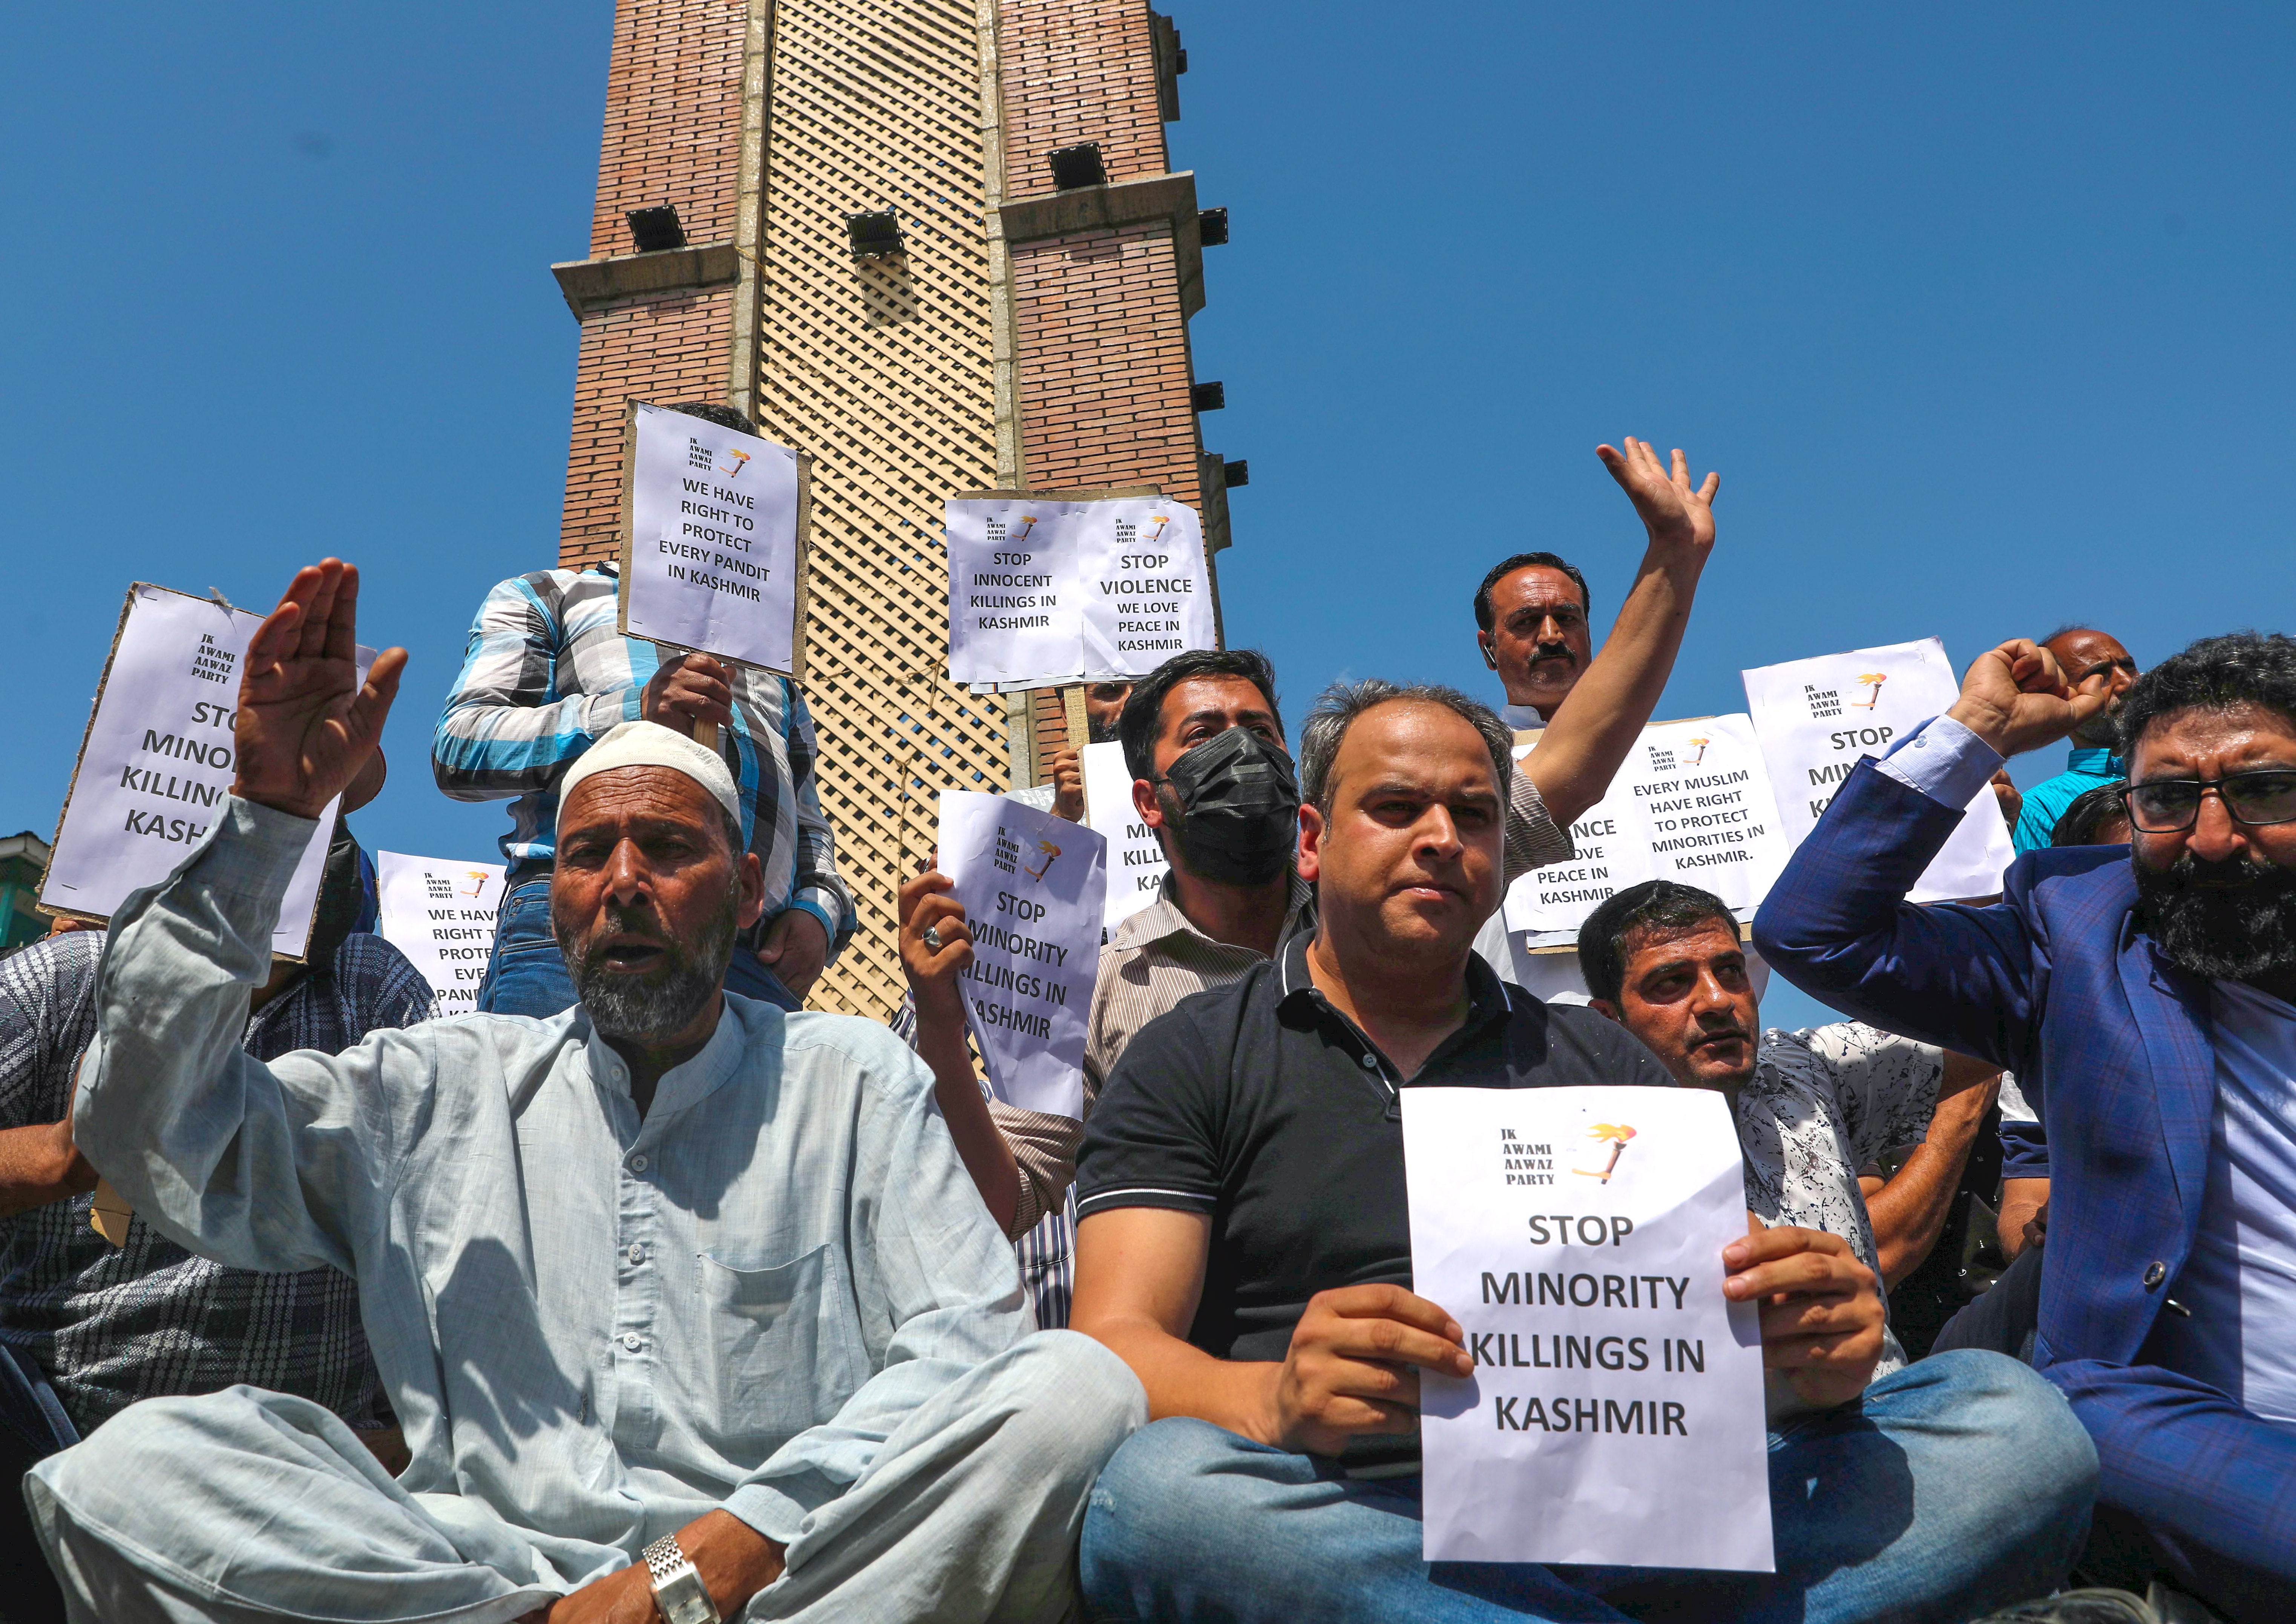 Members of Kashmiri political party JK Awami Aawaz Party hold placards as they take part in a protest against minority killings in Srinagar on 2 June